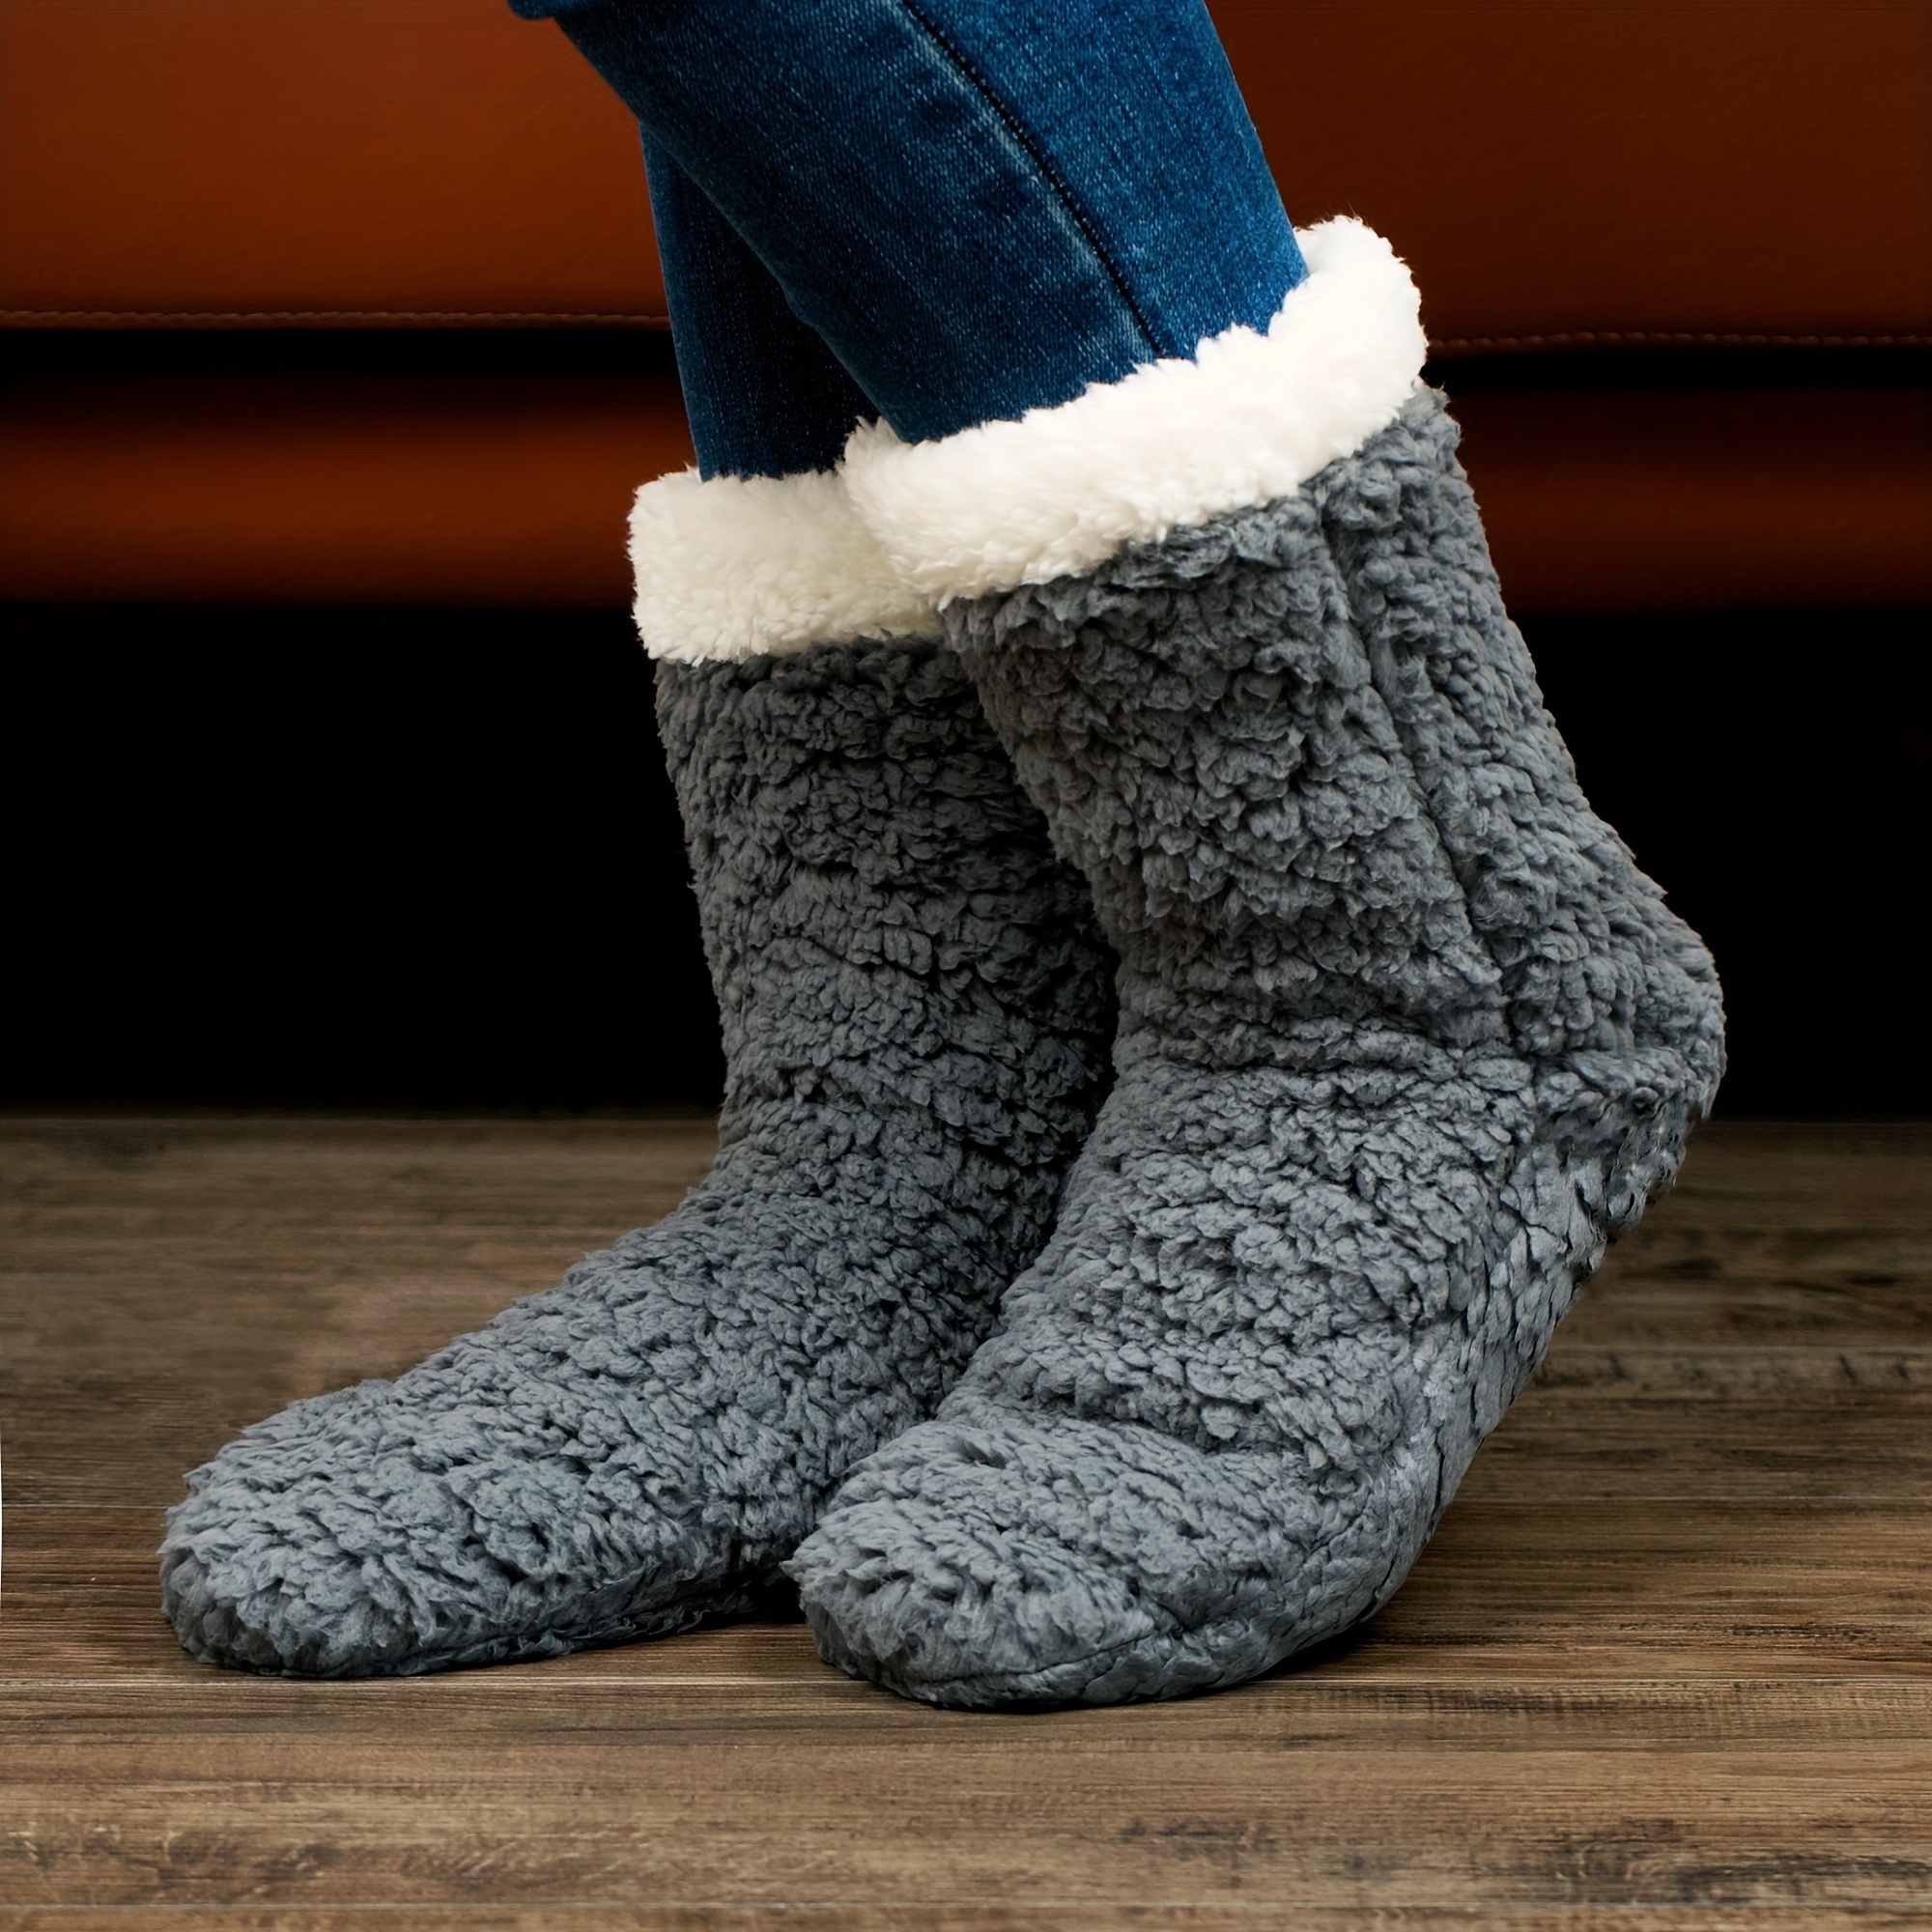 THE COMFY Slipper Socks, Women's Soft, Cozy Socks with Non-Skid Sole, Gray Chenille Exterior and Sherpa Lining